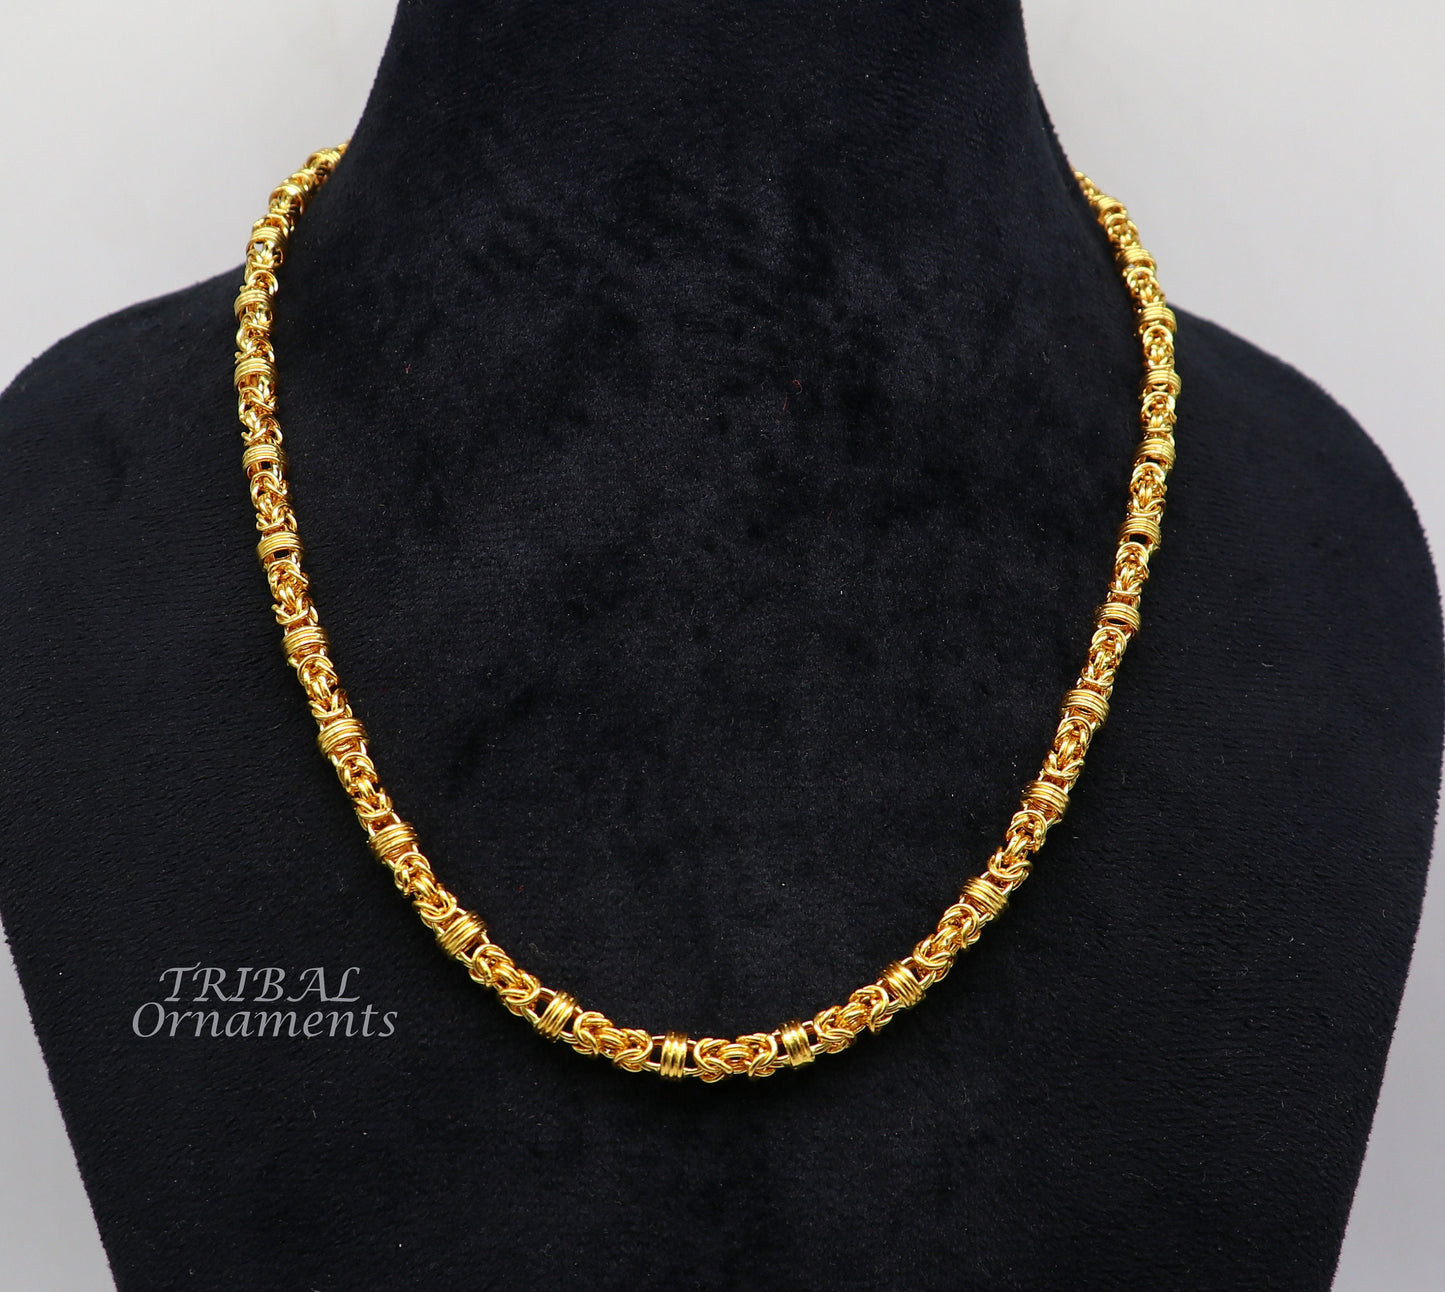 20 to 28 inches certified 22k yellow gold handmade fabulous byzantine chain necklace unisex gifting stylish jewelry for gifting ch567 - TRIBAL ORNAMENTS